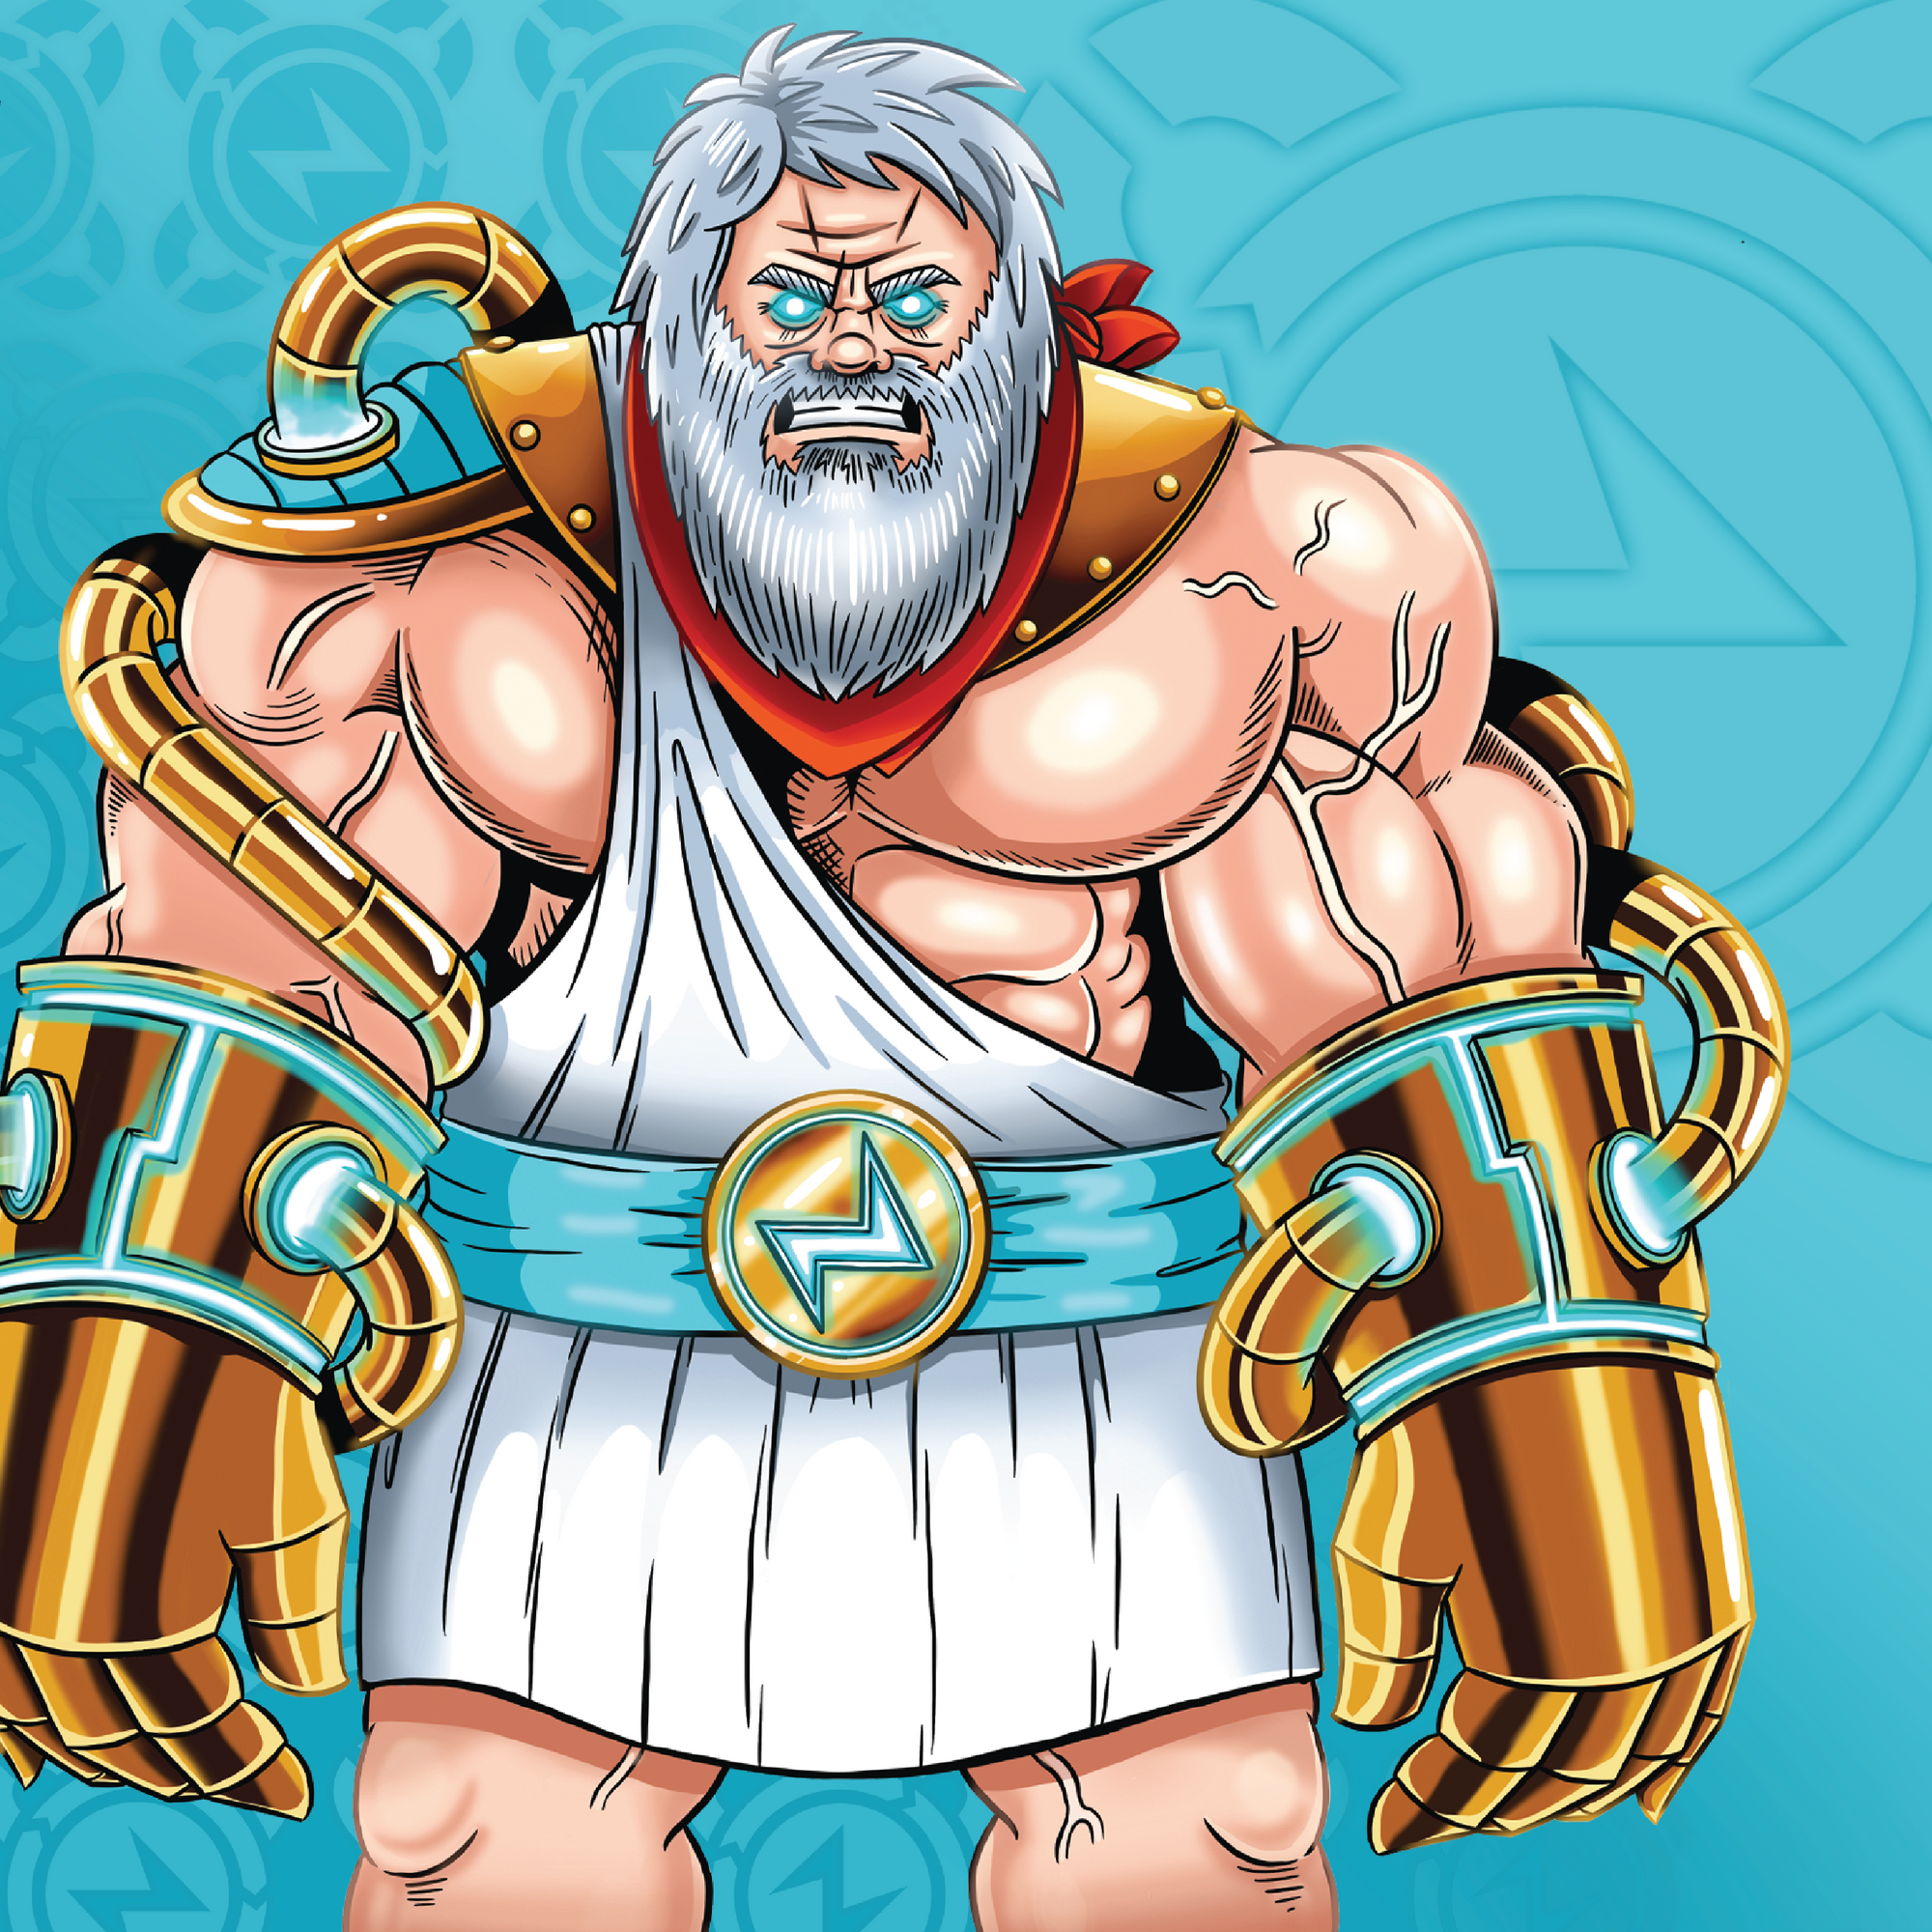 "Comic style drawing of Greek Mythology character, Zeus, action figure with a beard and arctic blue lightning bolt belt "